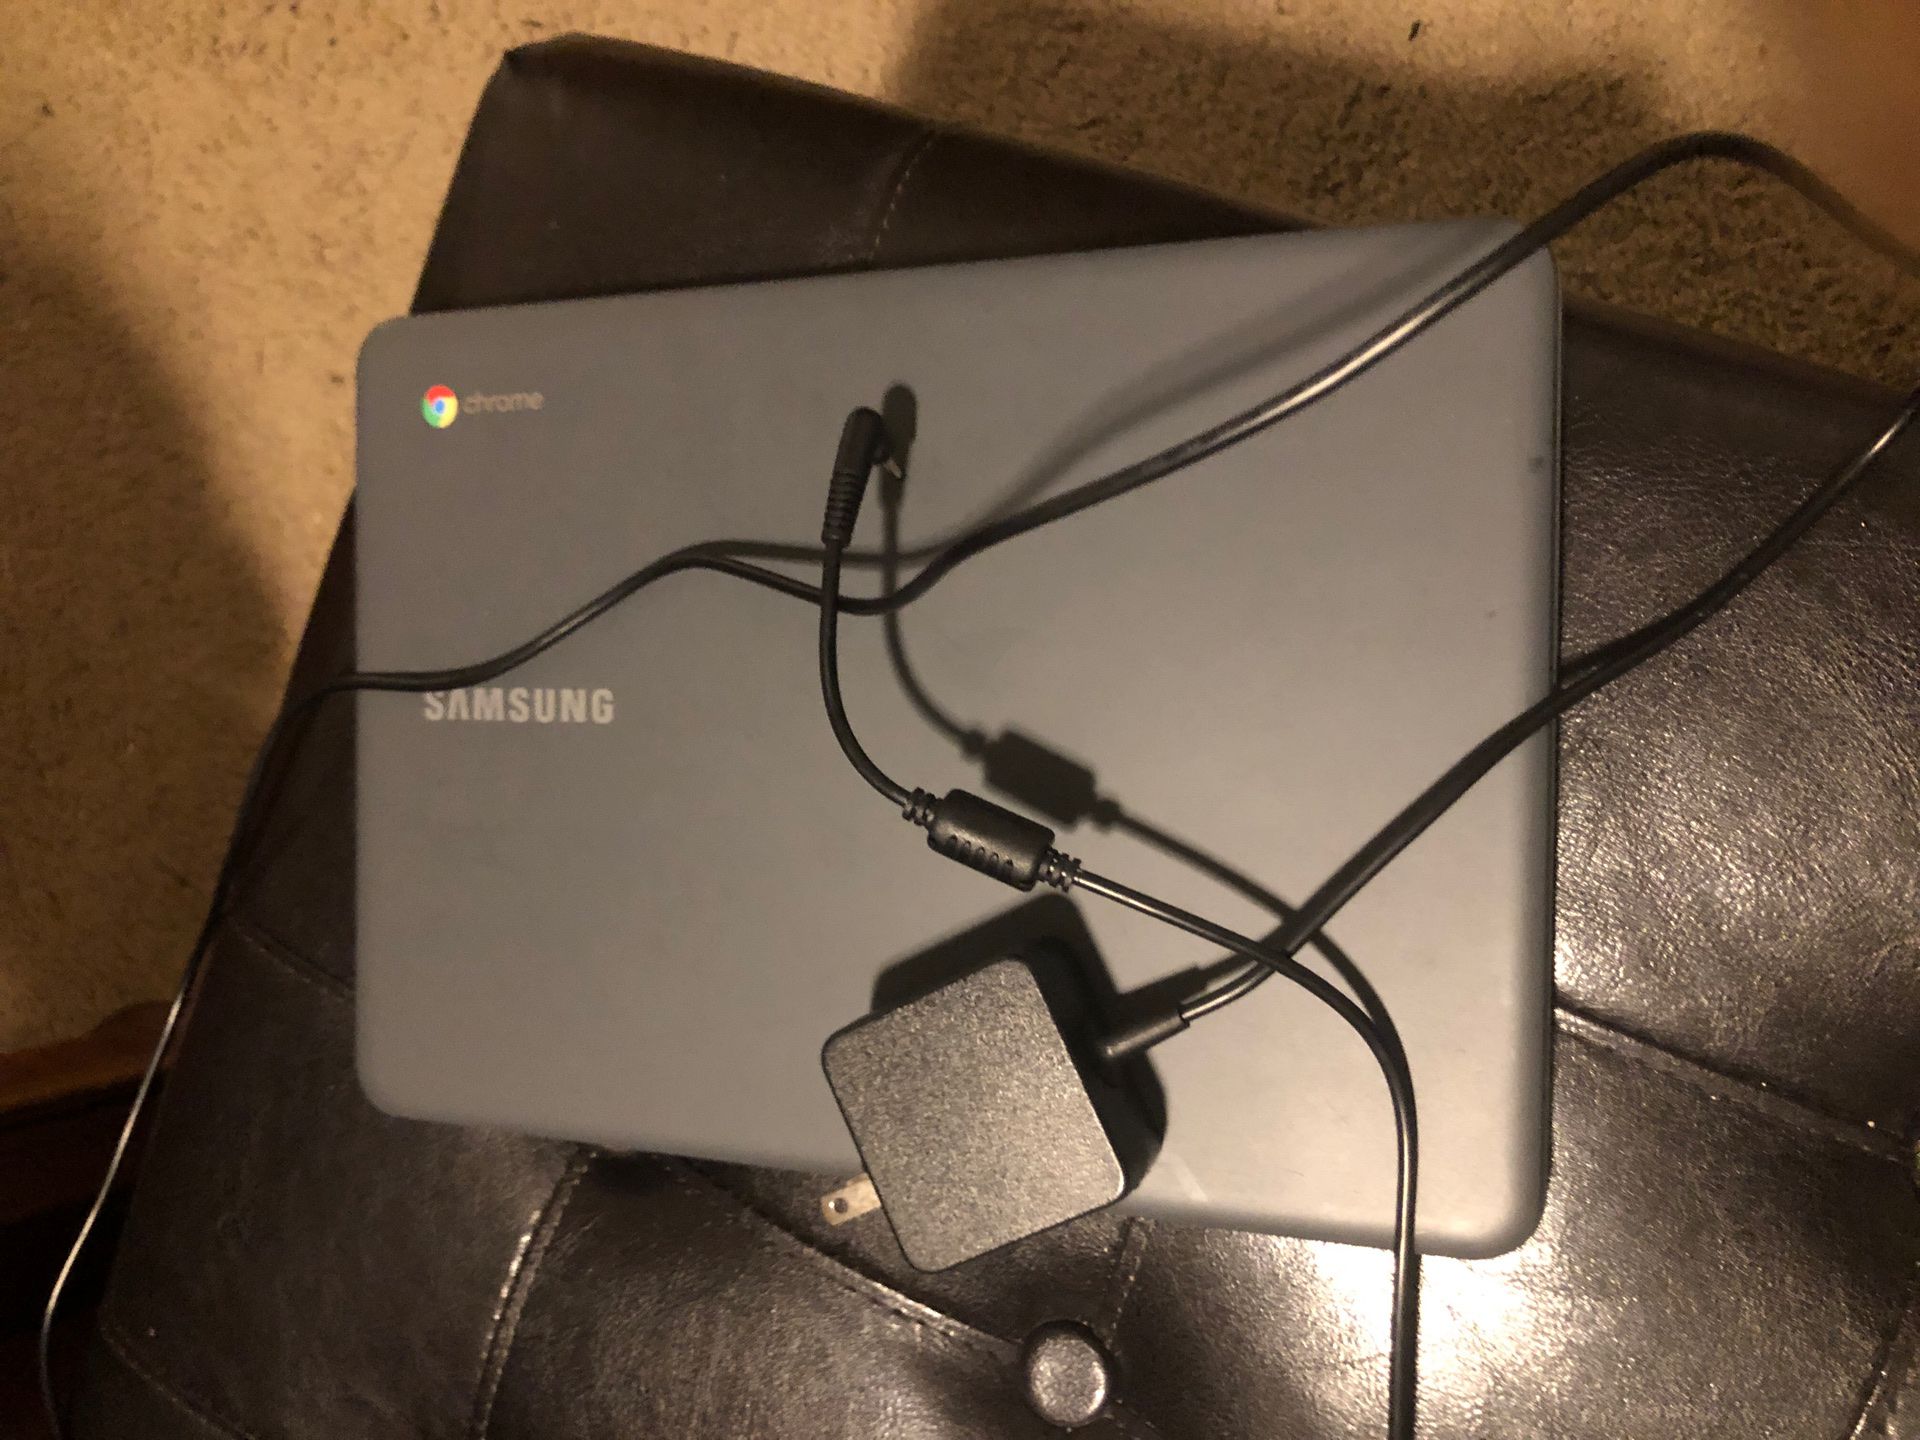 Chrome book and charger